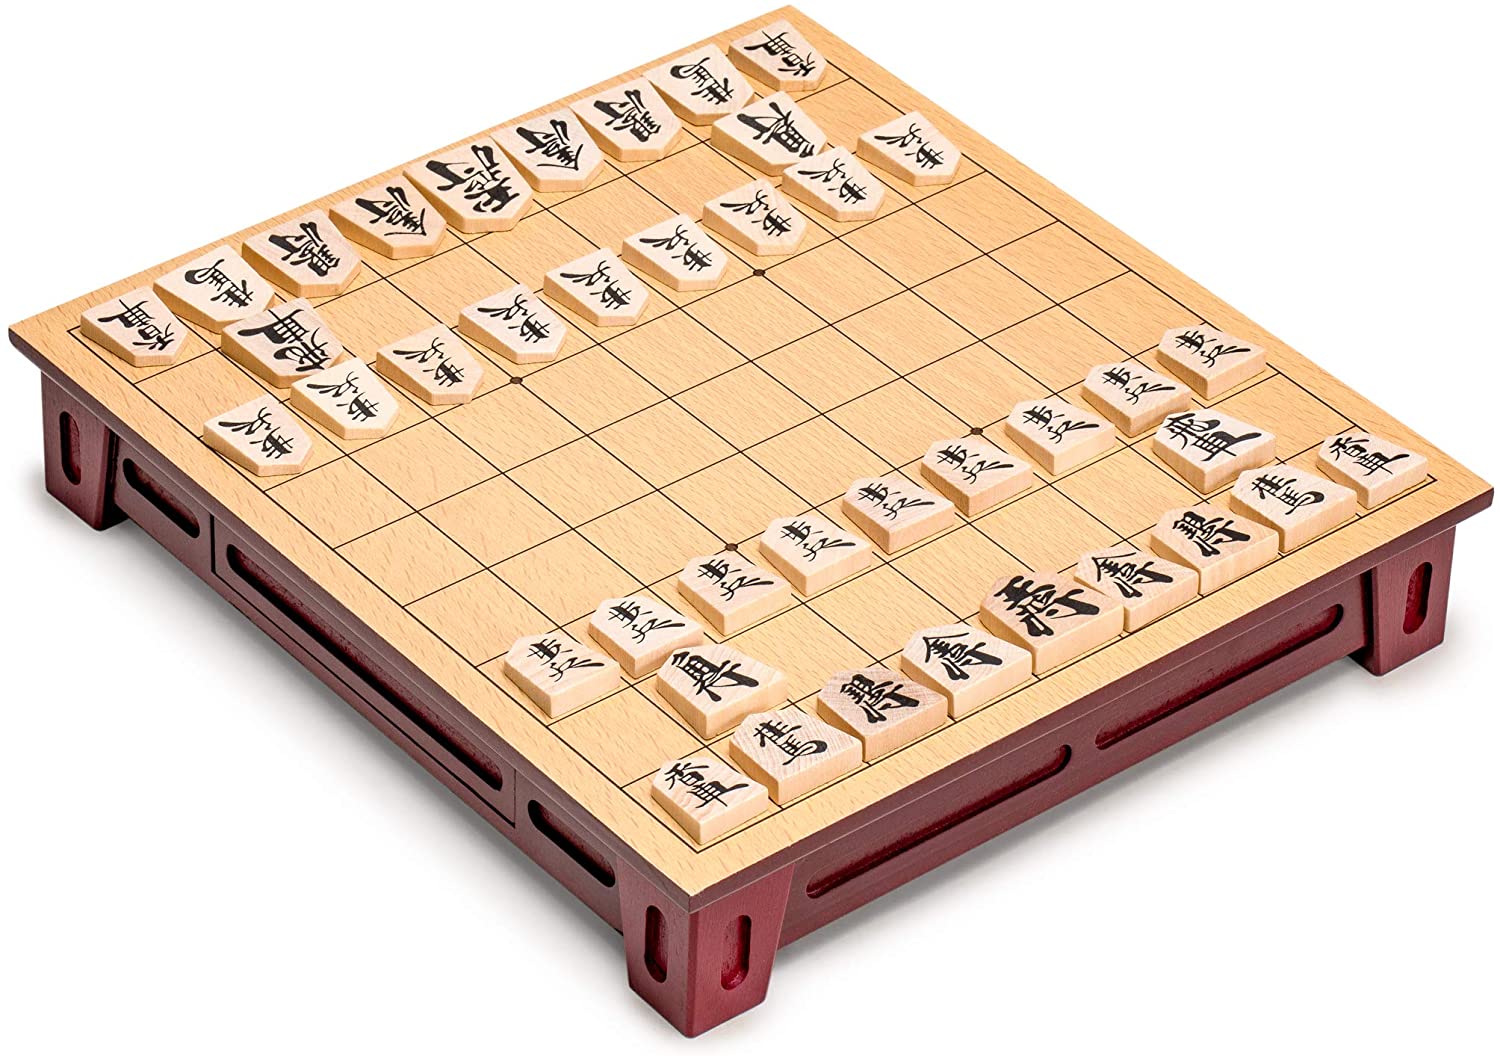 Started playing today. Tsume problems are so useful for learning how pieces  move and interact! : r/shogi